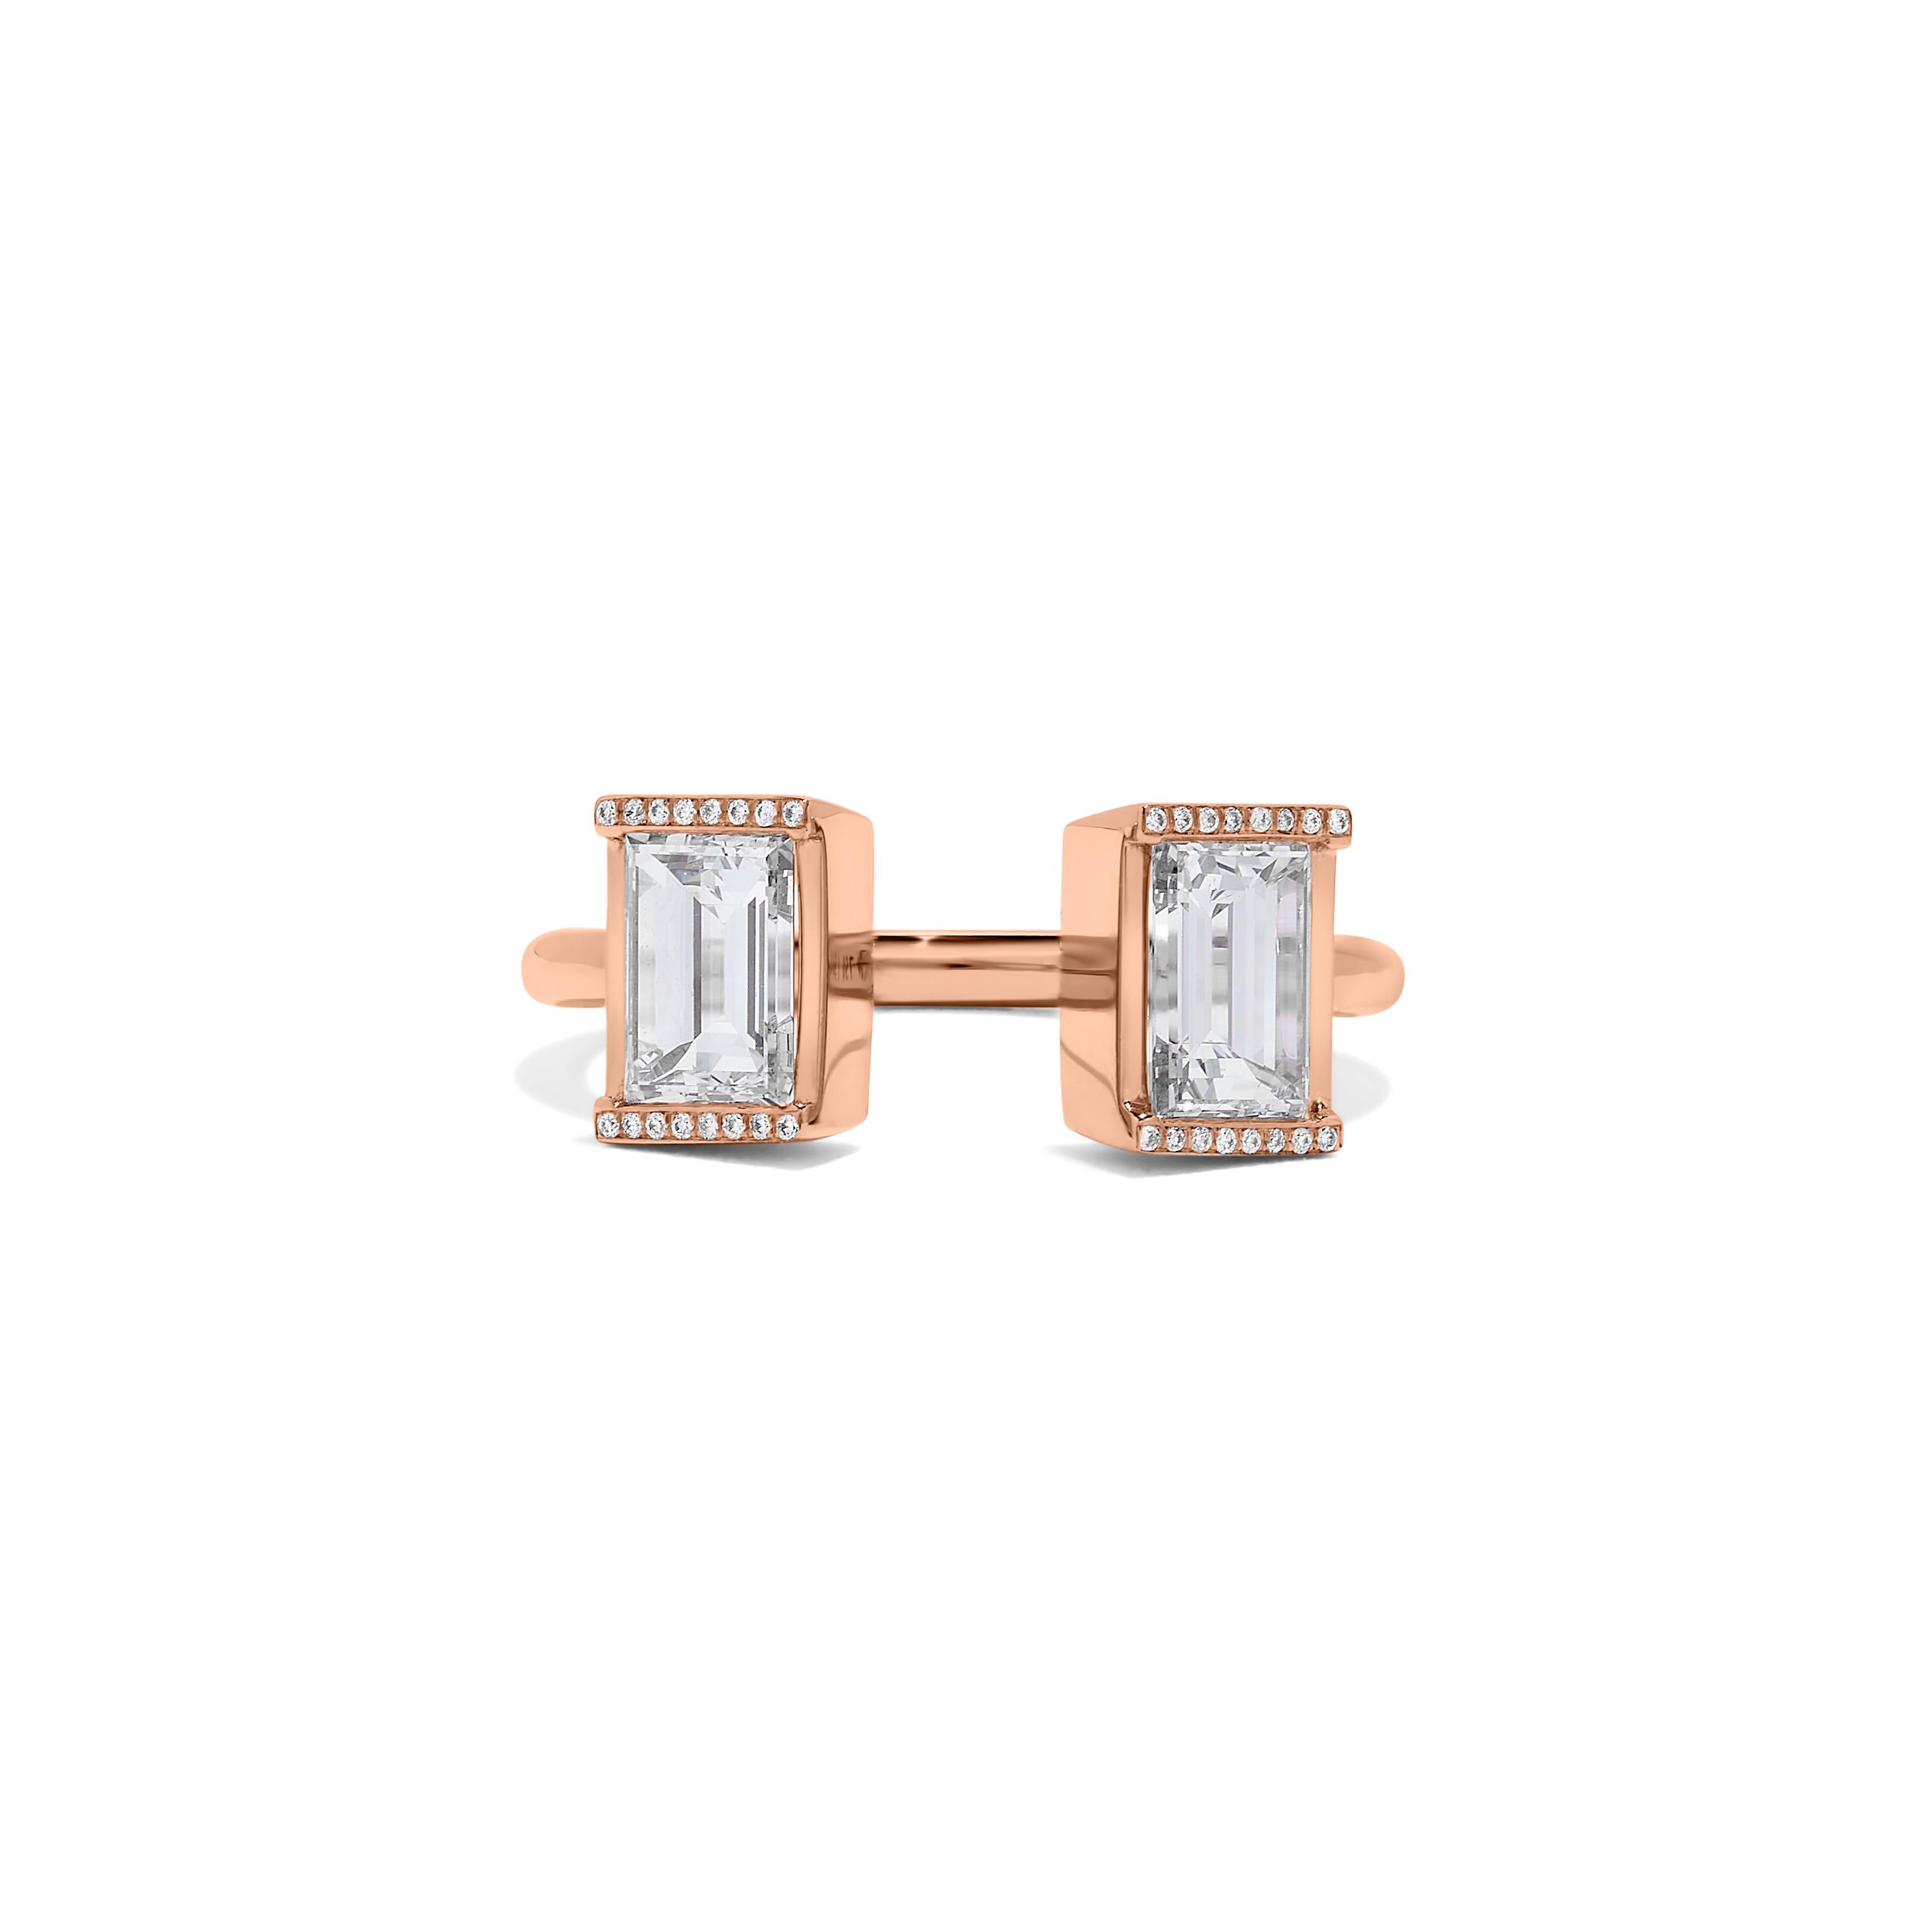 This two stone ring features two GIA certified diamonds weighing 0.72 and 0.78 carats with 0.06 melees set in rose Gold. Size 6. Resizable upon request. 
Emerald Cut 0.72 D VVS2
Emerald Cut 0.78 F VVS2
